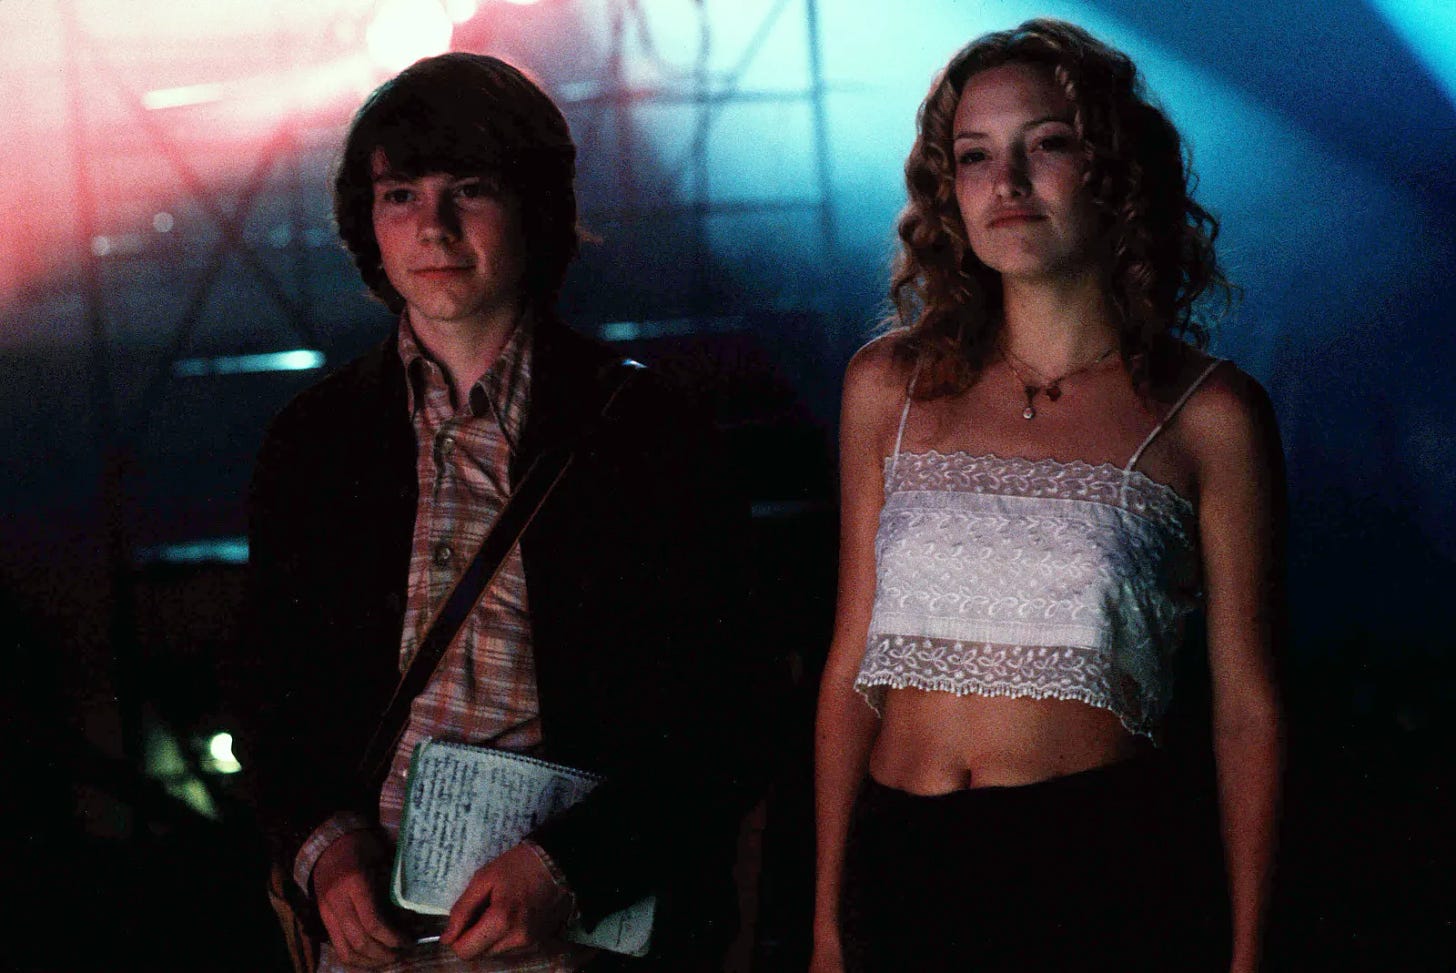 William and Penny Lane backstage at the concert in Almost Famous.